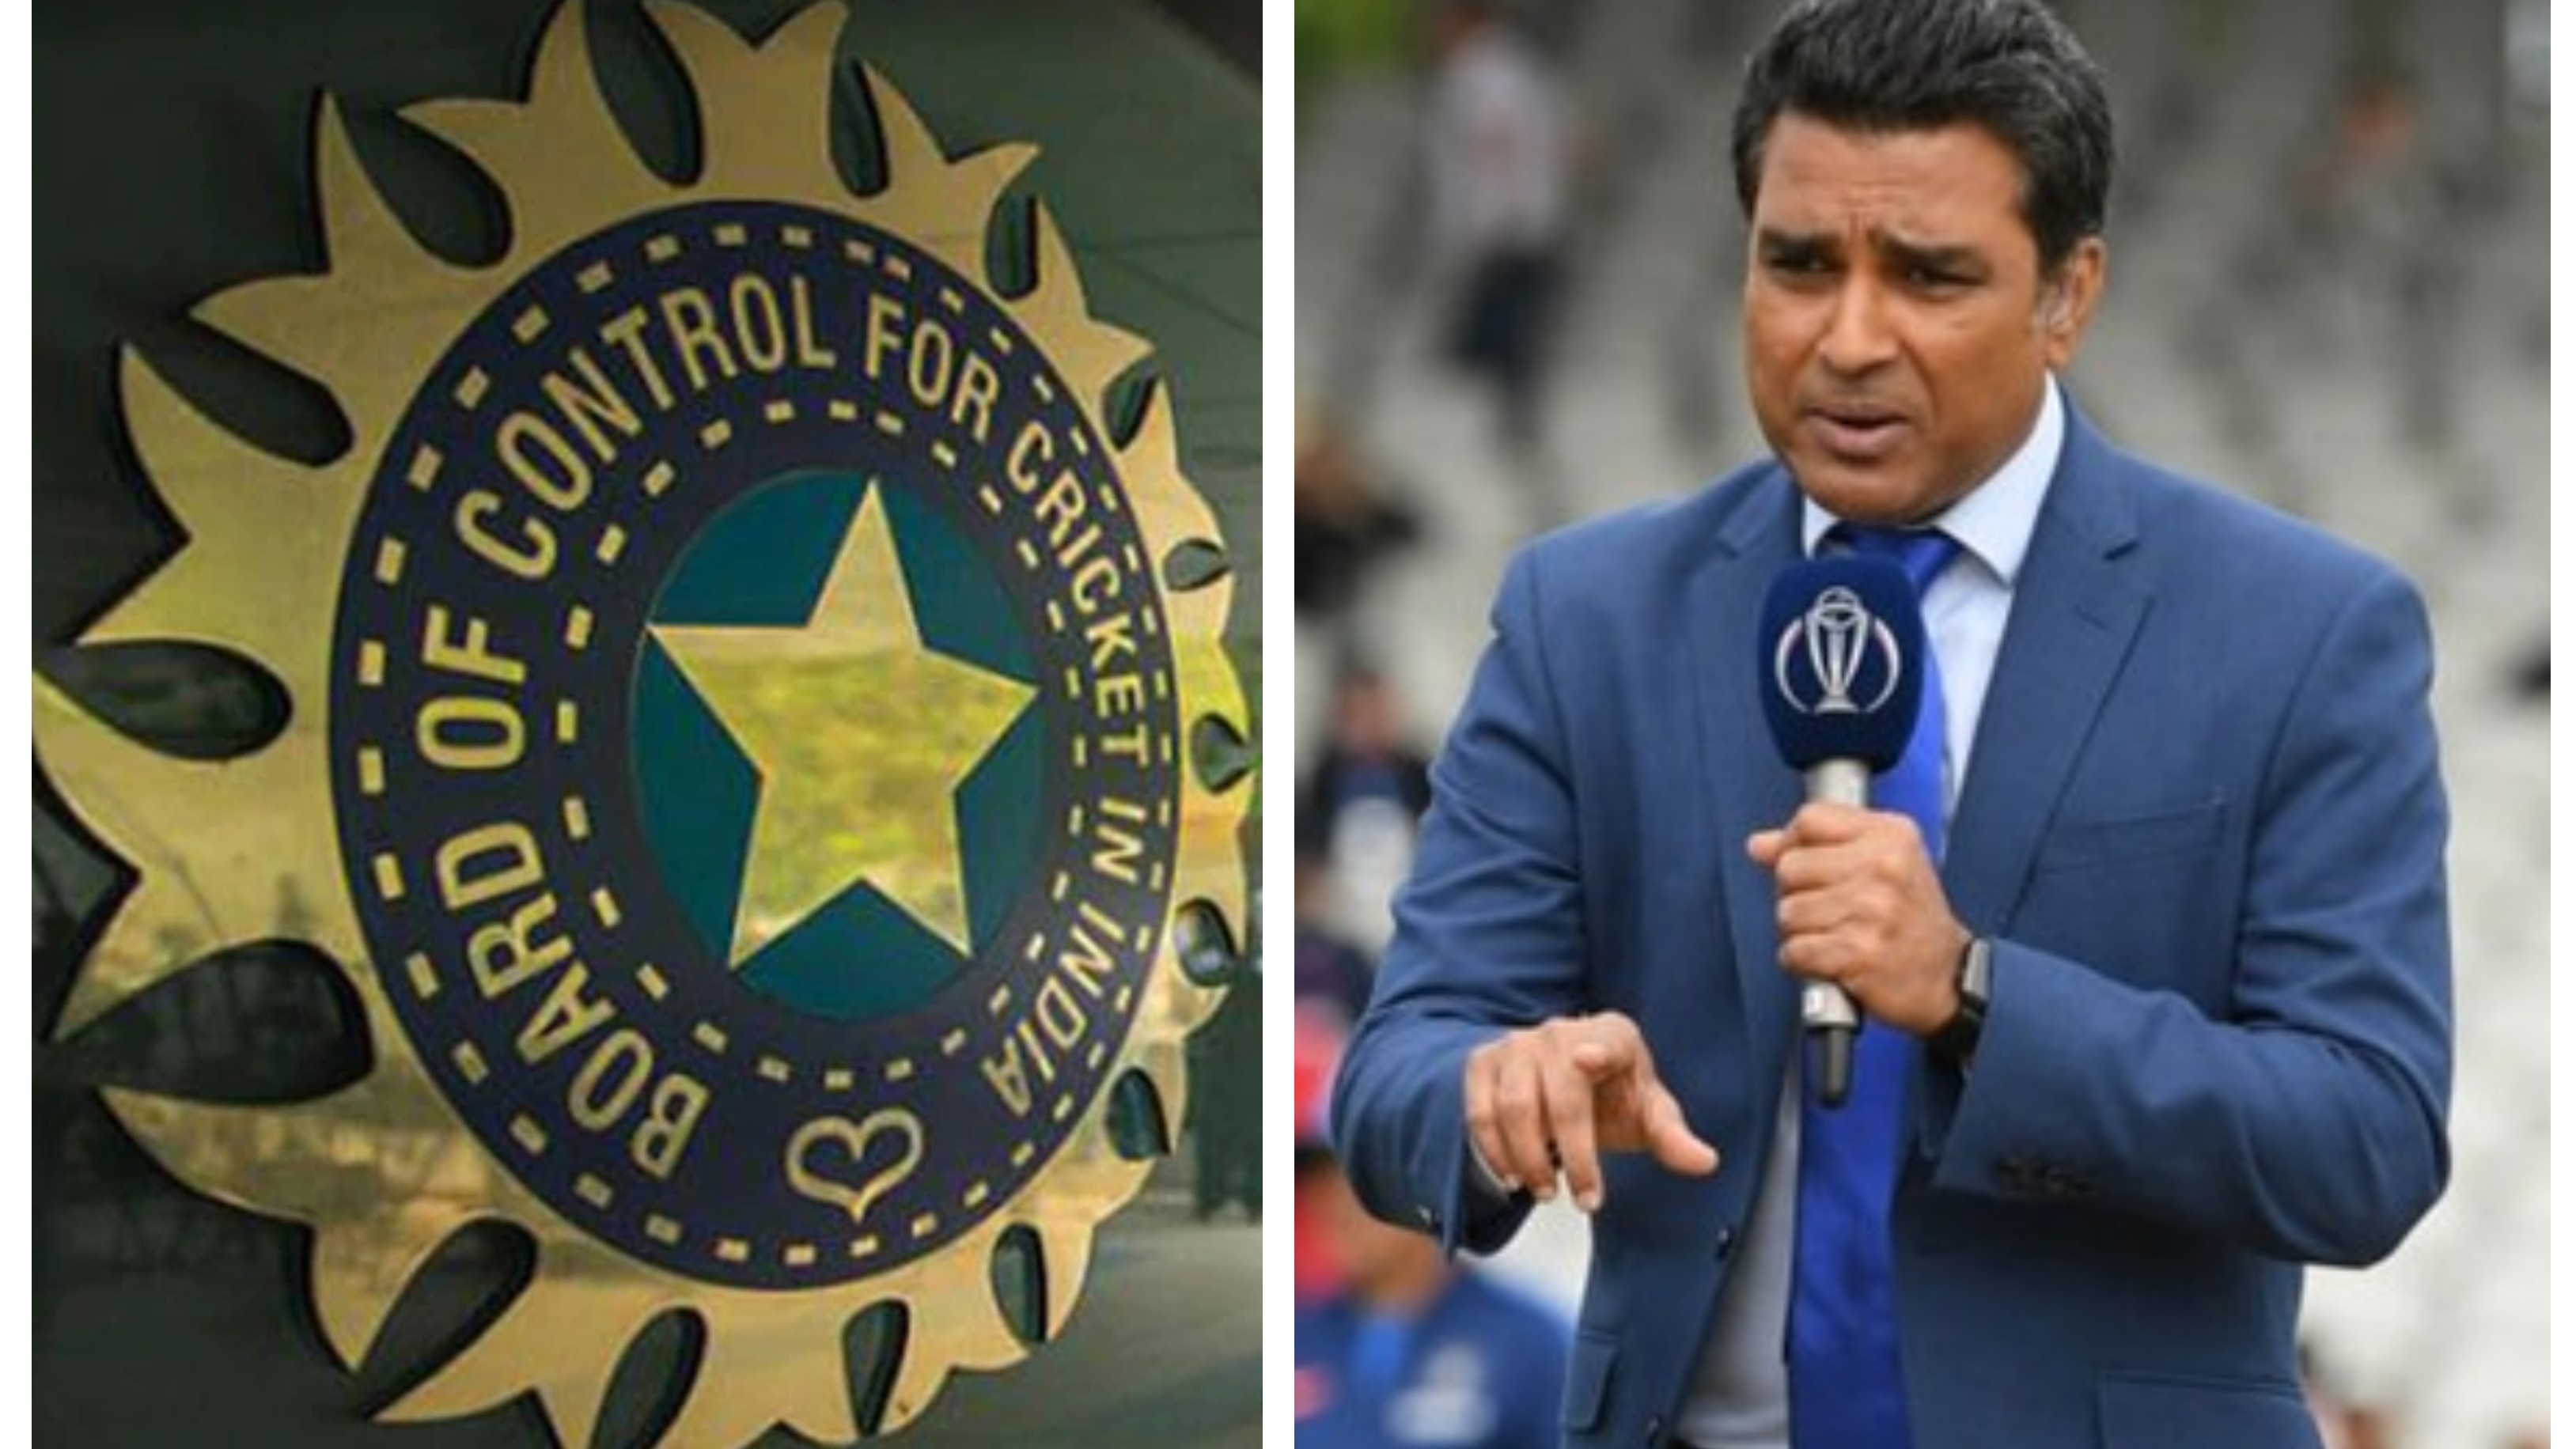 MCA group requests BCCI to reinstate Sanjay Manjrekar in the commentary team